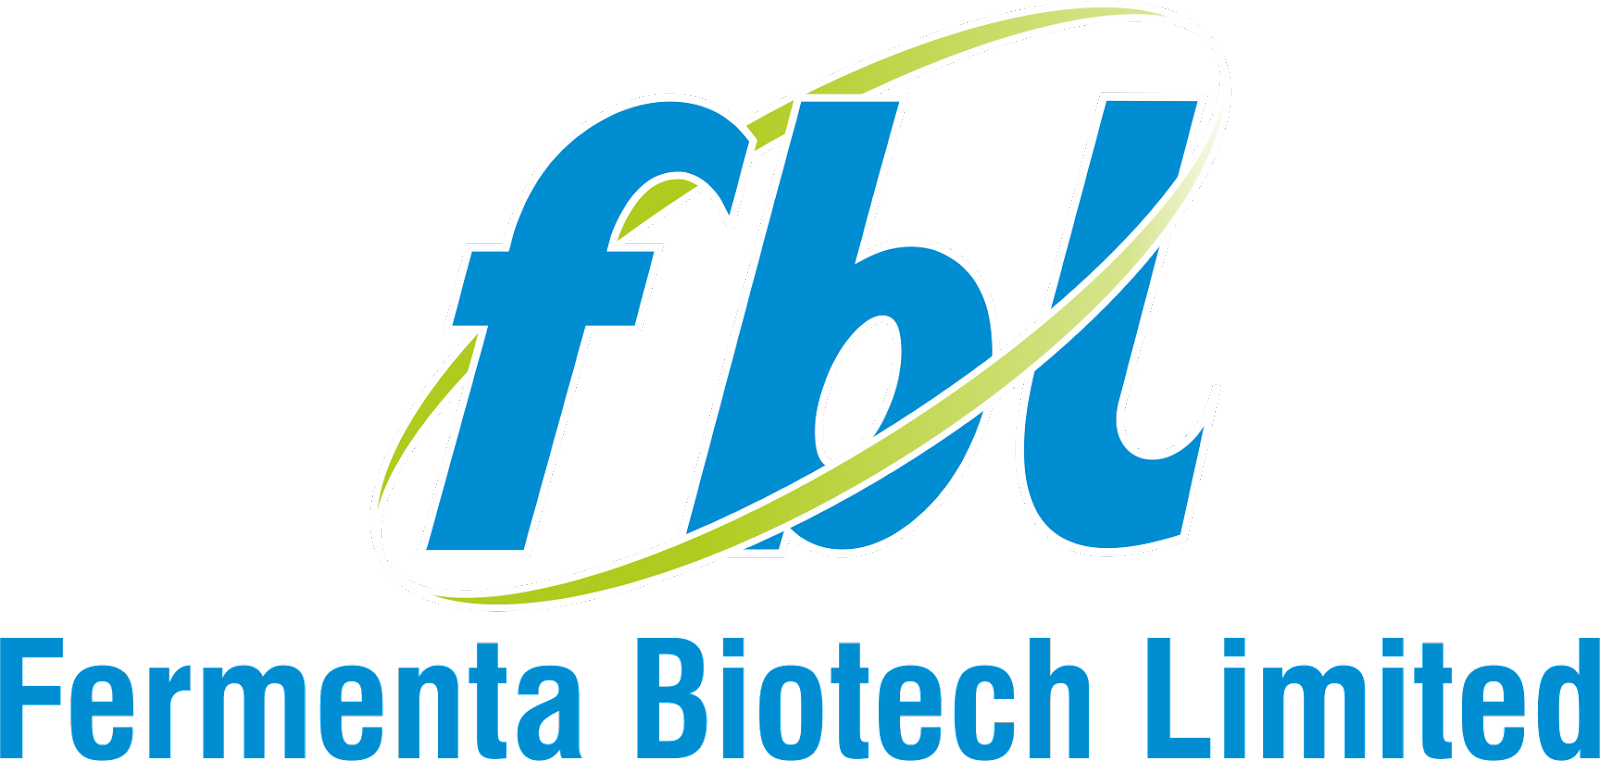 Fermenta Biotech Limited commissions Fortified Rice Kernel manufacturing facility in Tirupati District, Andhra Pradesh